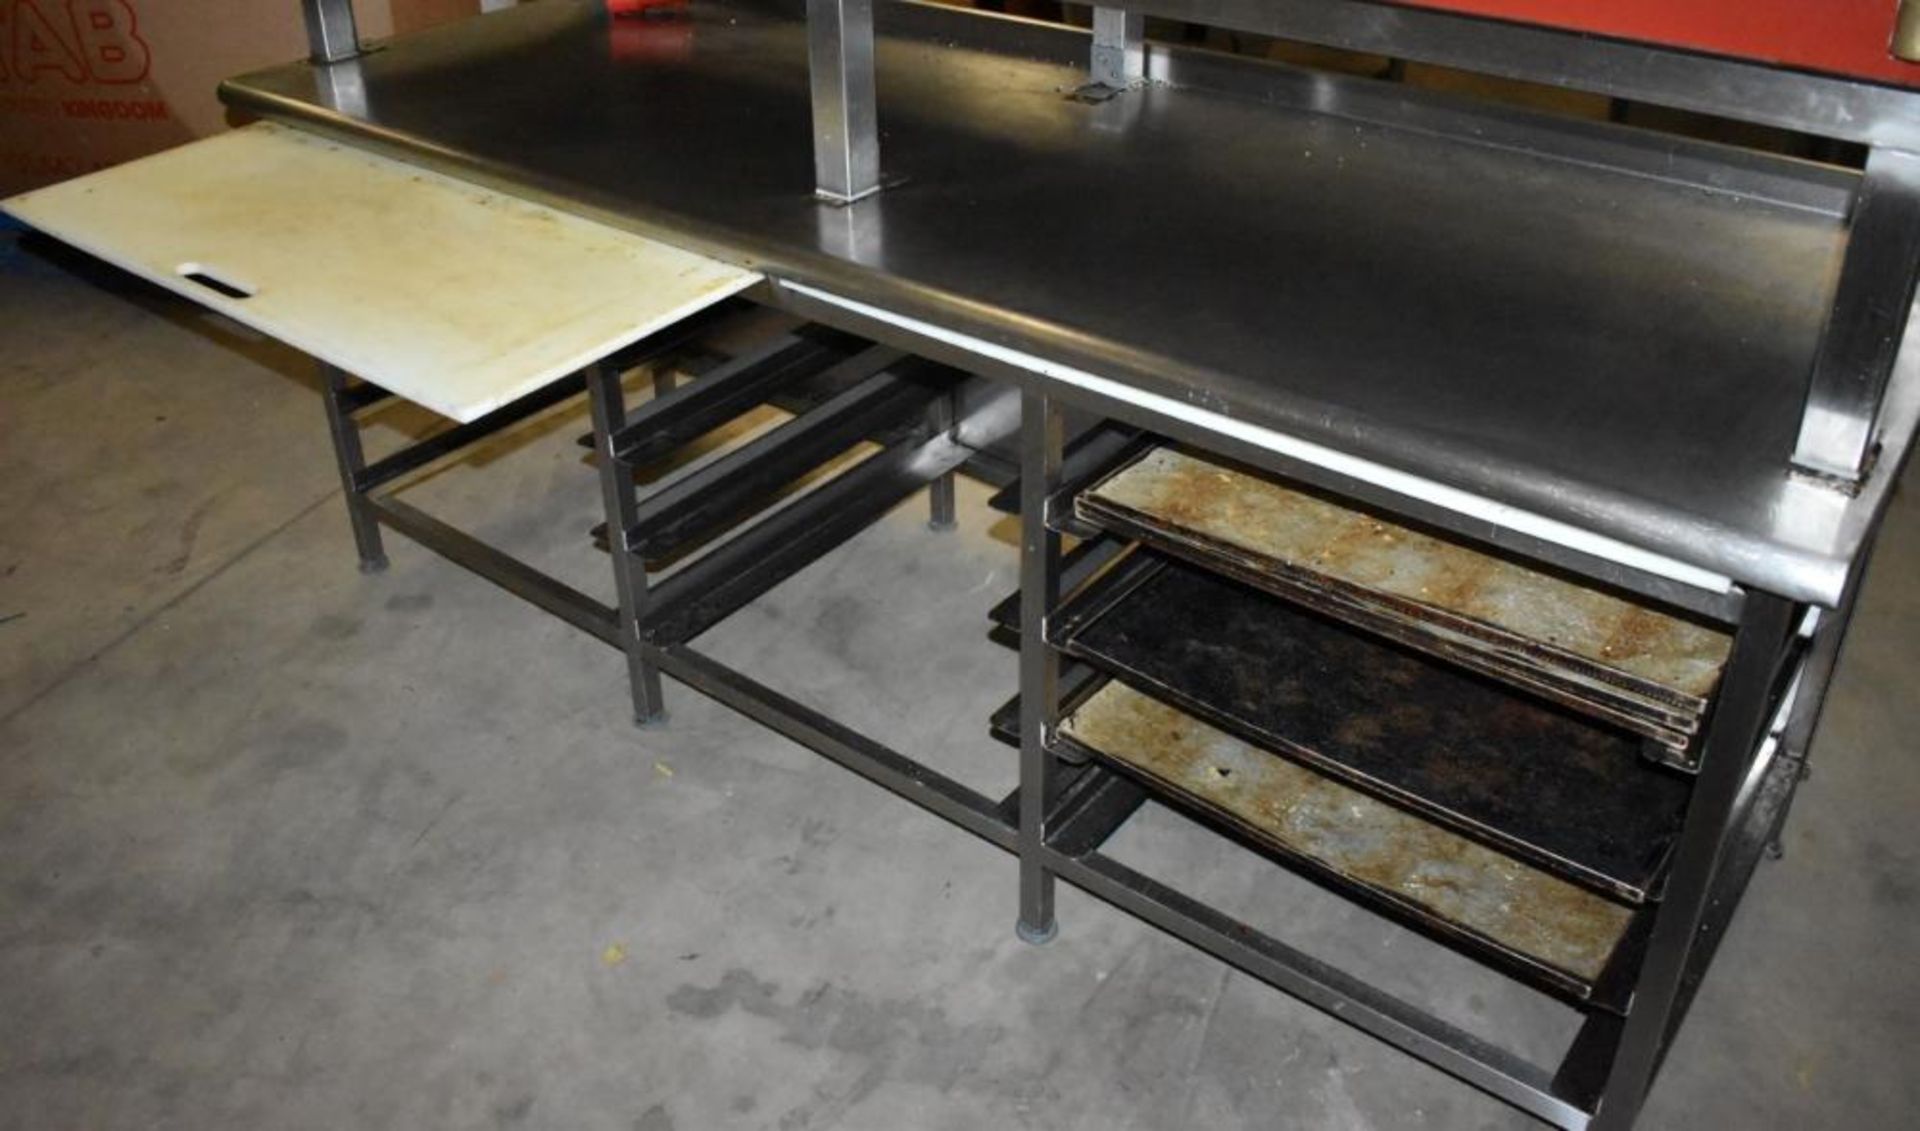 1 x Tom Chandley Double C5 60X40 Pie Oven With Stainless Steel Baking Tray Prep Bench - CL455 - Ref - Image 12 of 18